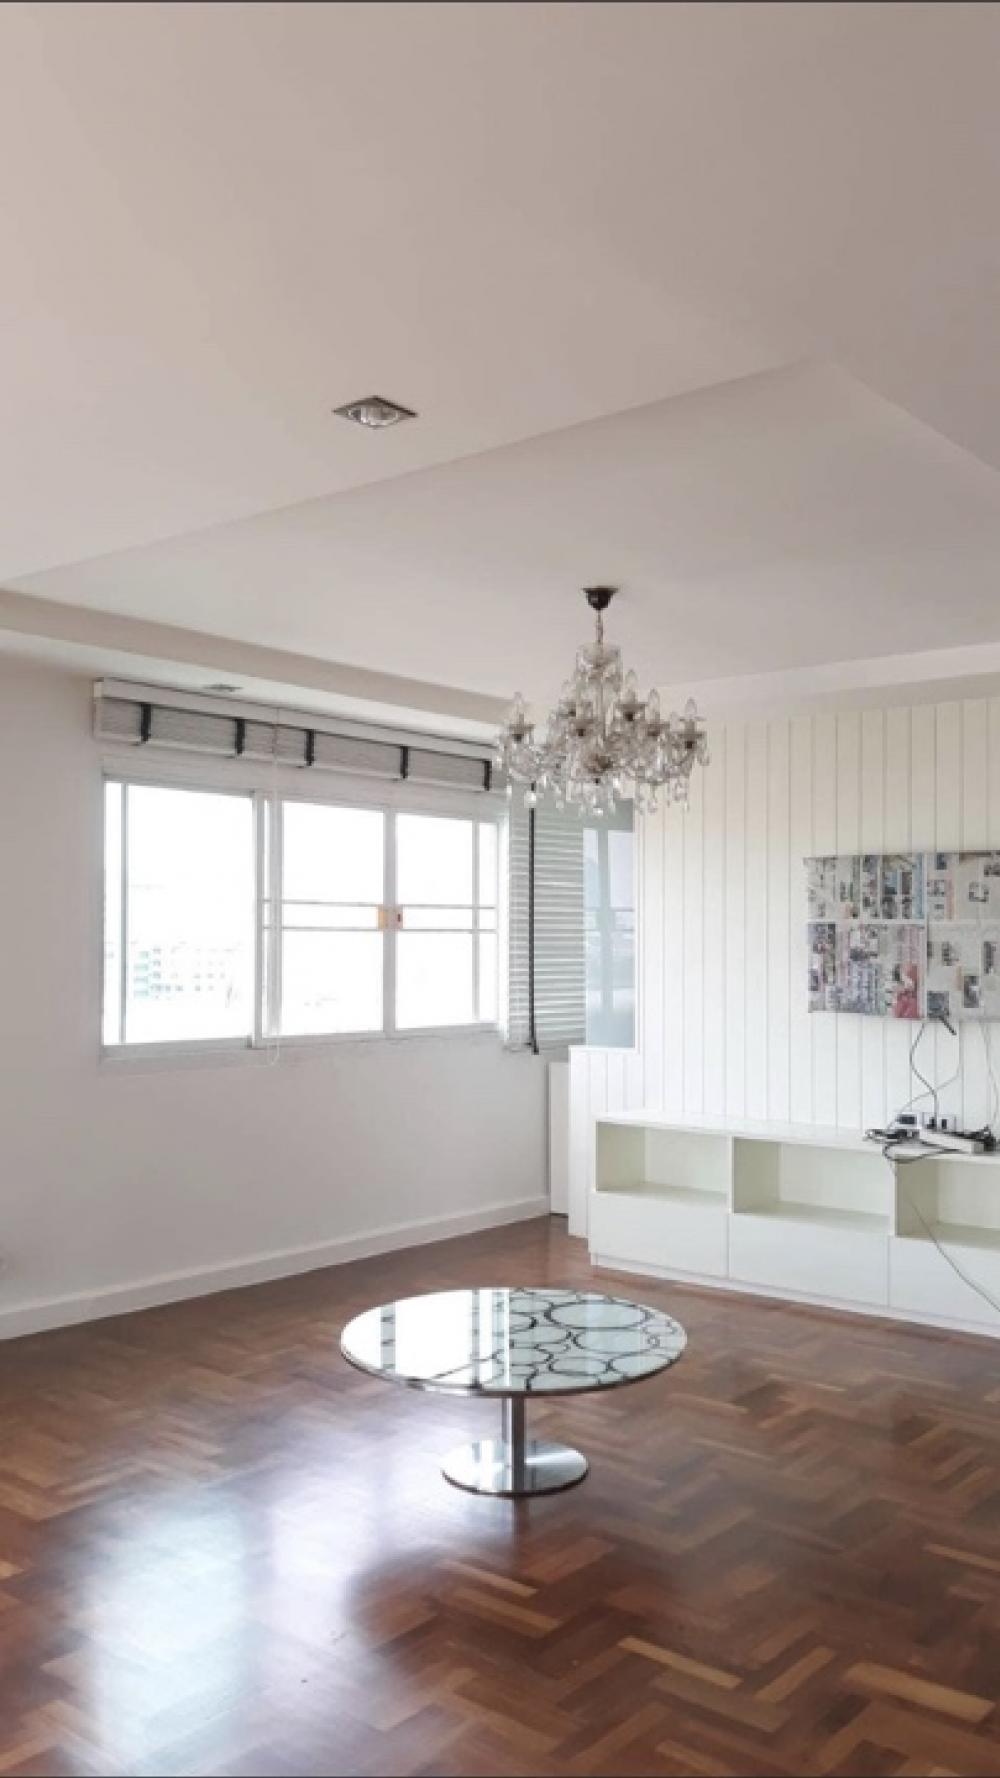 For RentCondoSapankwai,Jatujak : TK0136 Beautifully decorated penthouse condo decorated with chandeliers, vintage white tones, corner room with large balcony. see a clear view around the newly decorated Near BTS Chatuchak, Saphan Khwai, ready to move in.